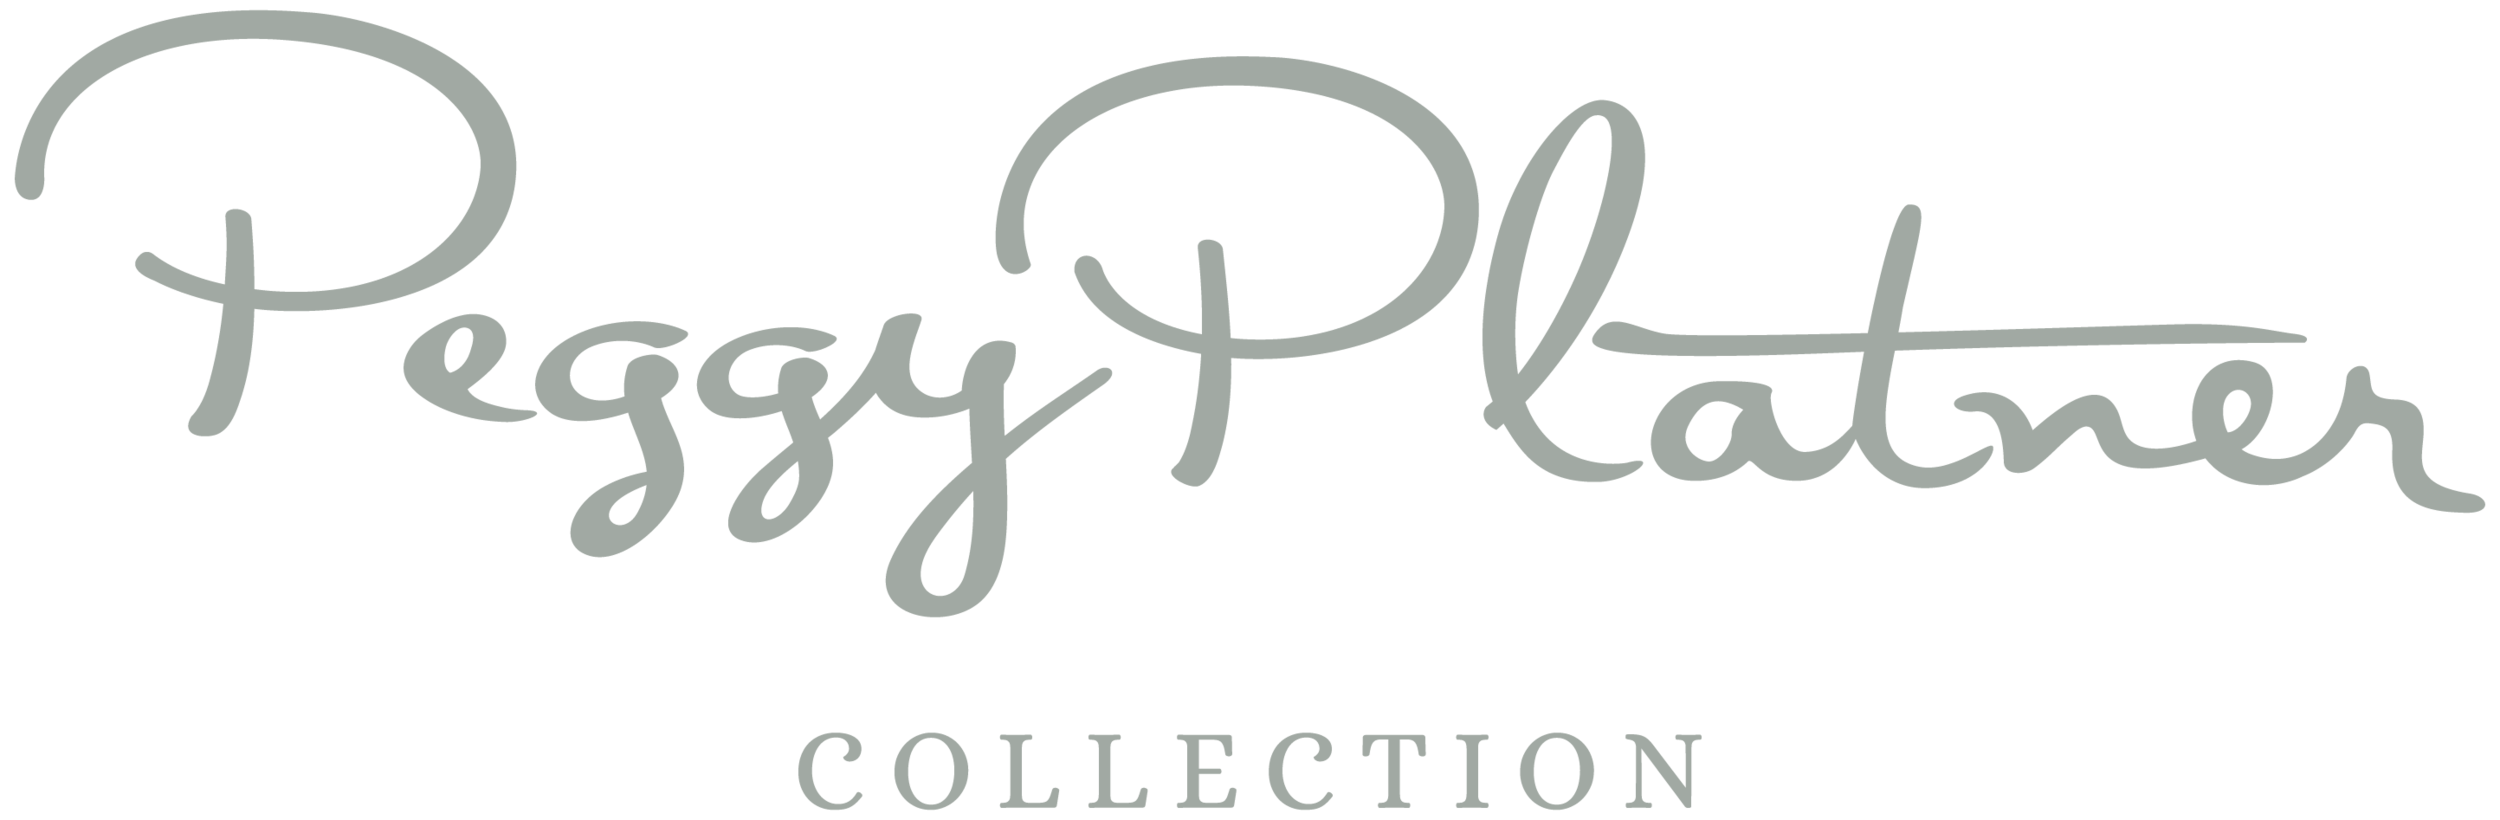 Peggy Platner Collection